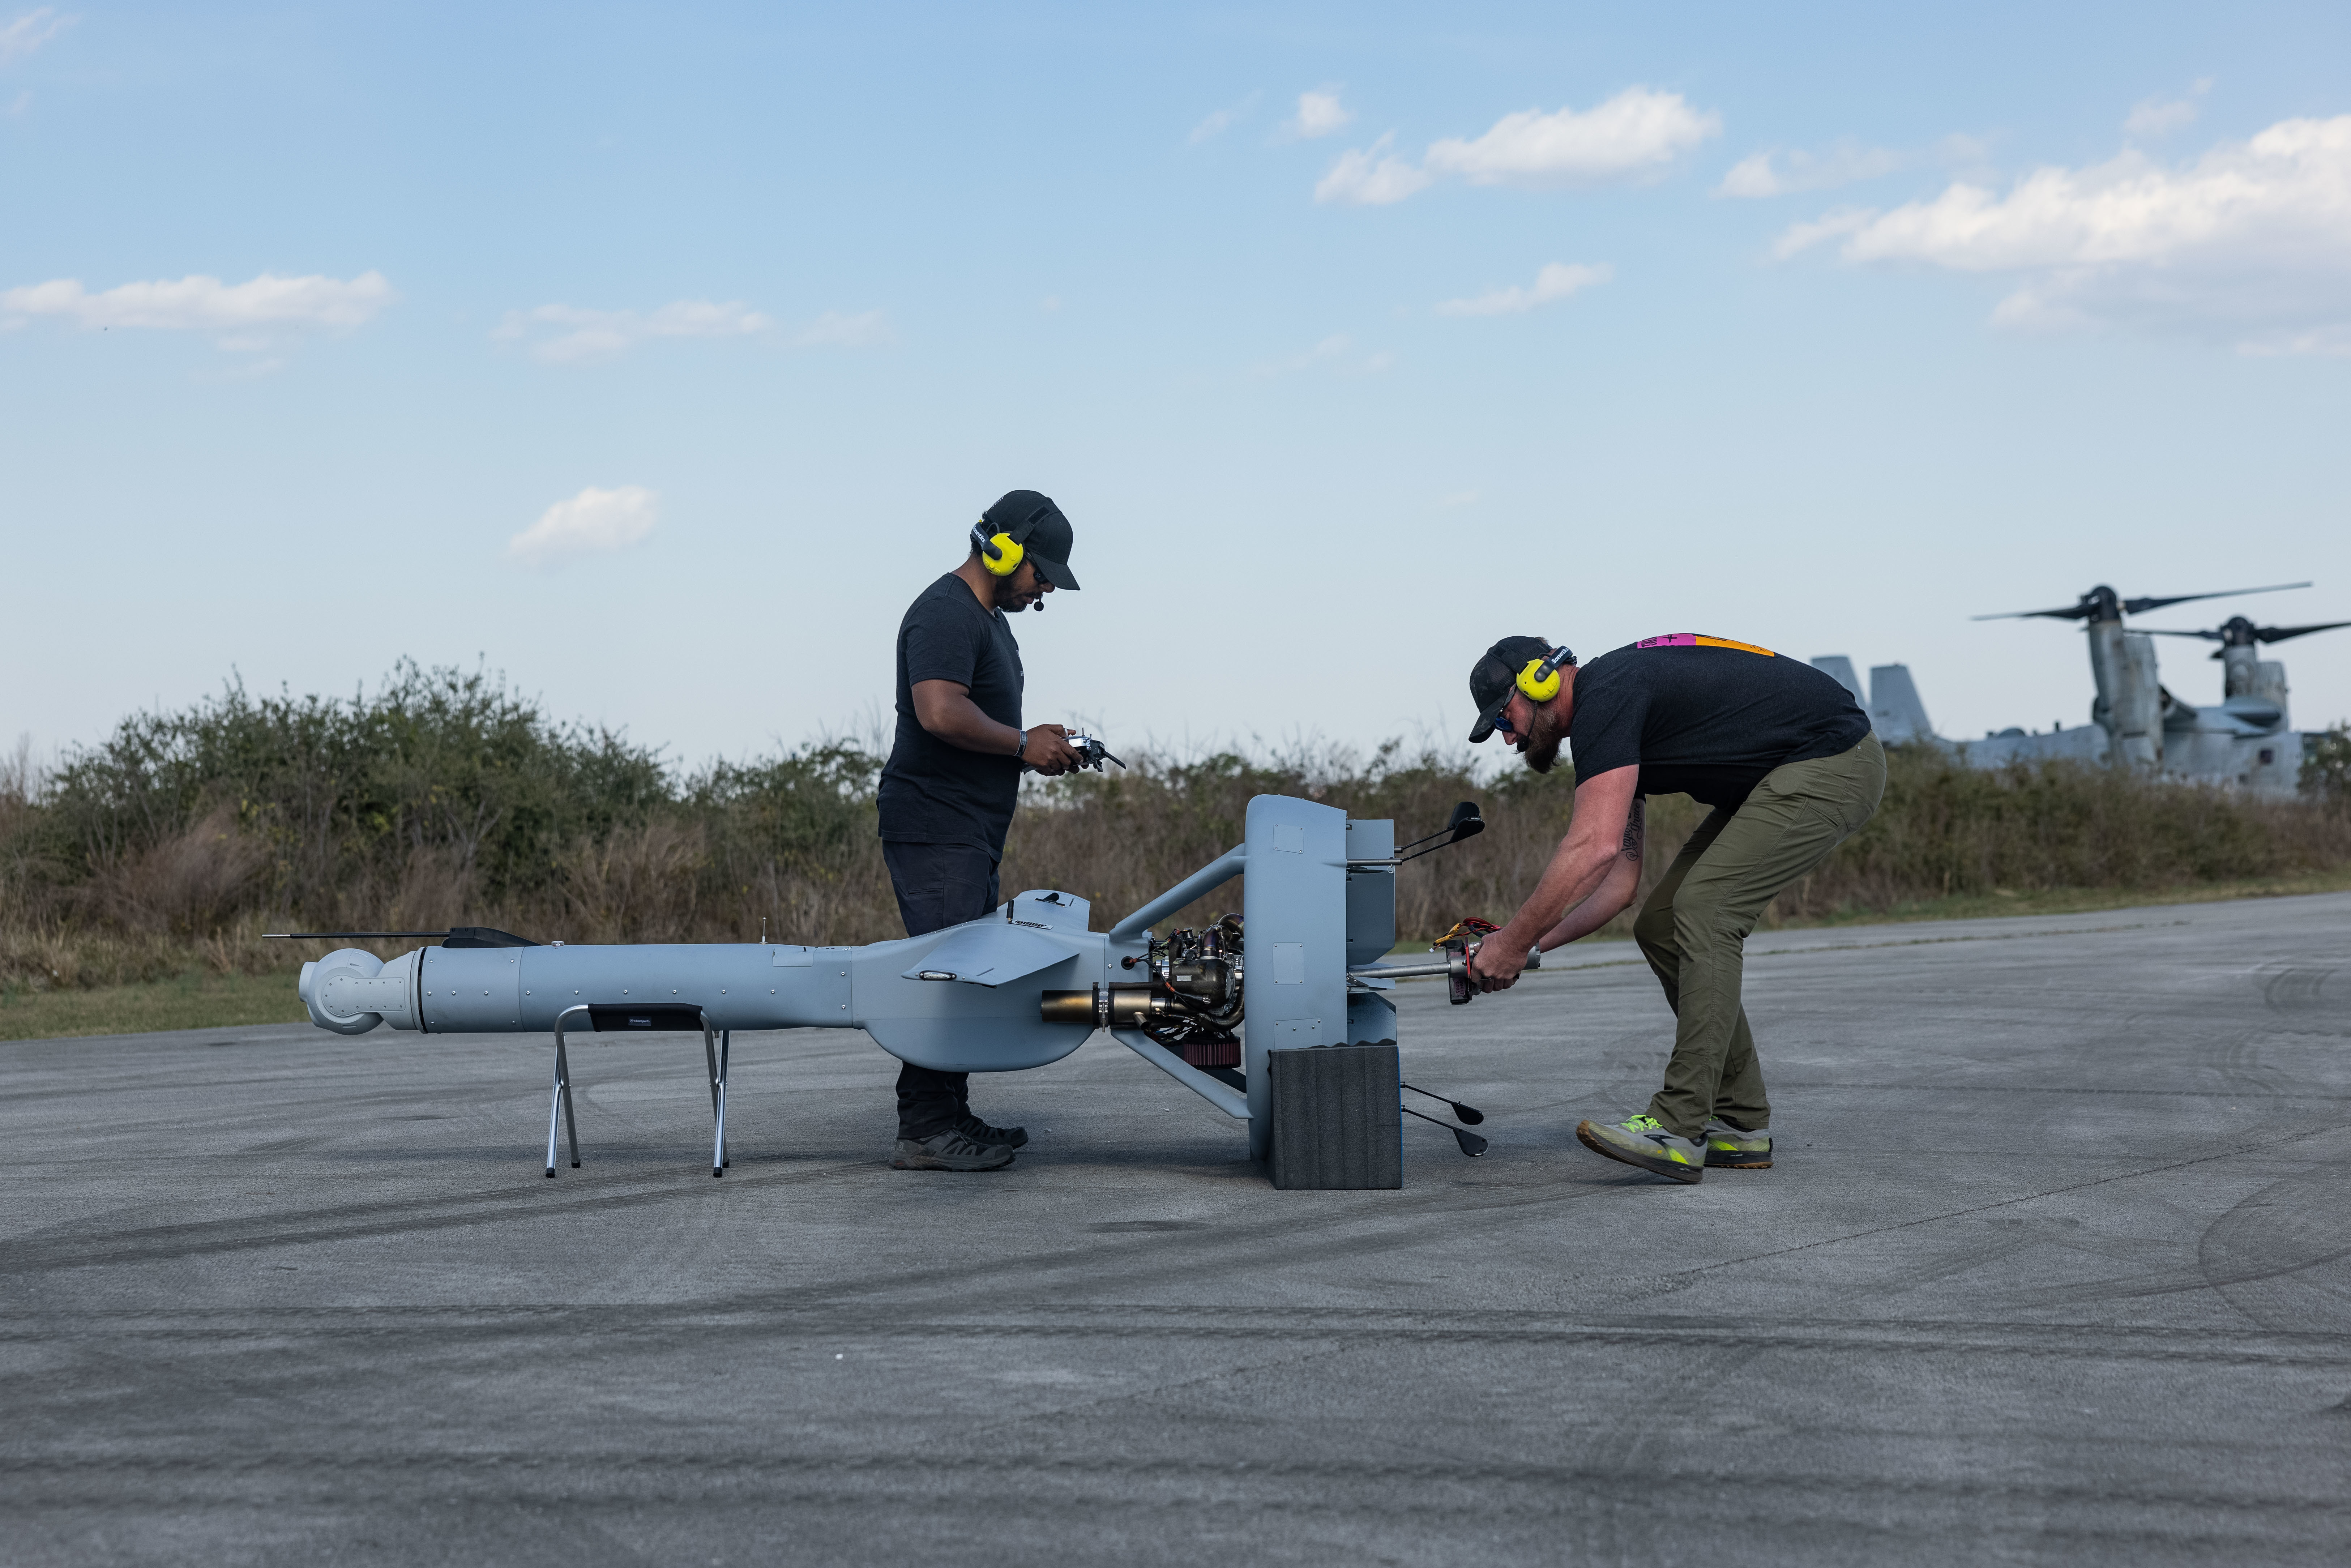 U.S. Department of Defense contractors start a V-BAT unmanned aerial system for flight operations during 26th Marine Expeditionary Unit (MEU) Exercise III at Marine Corps Auxiliary Landing Field Bogue, N.C., March 7, 2023. 